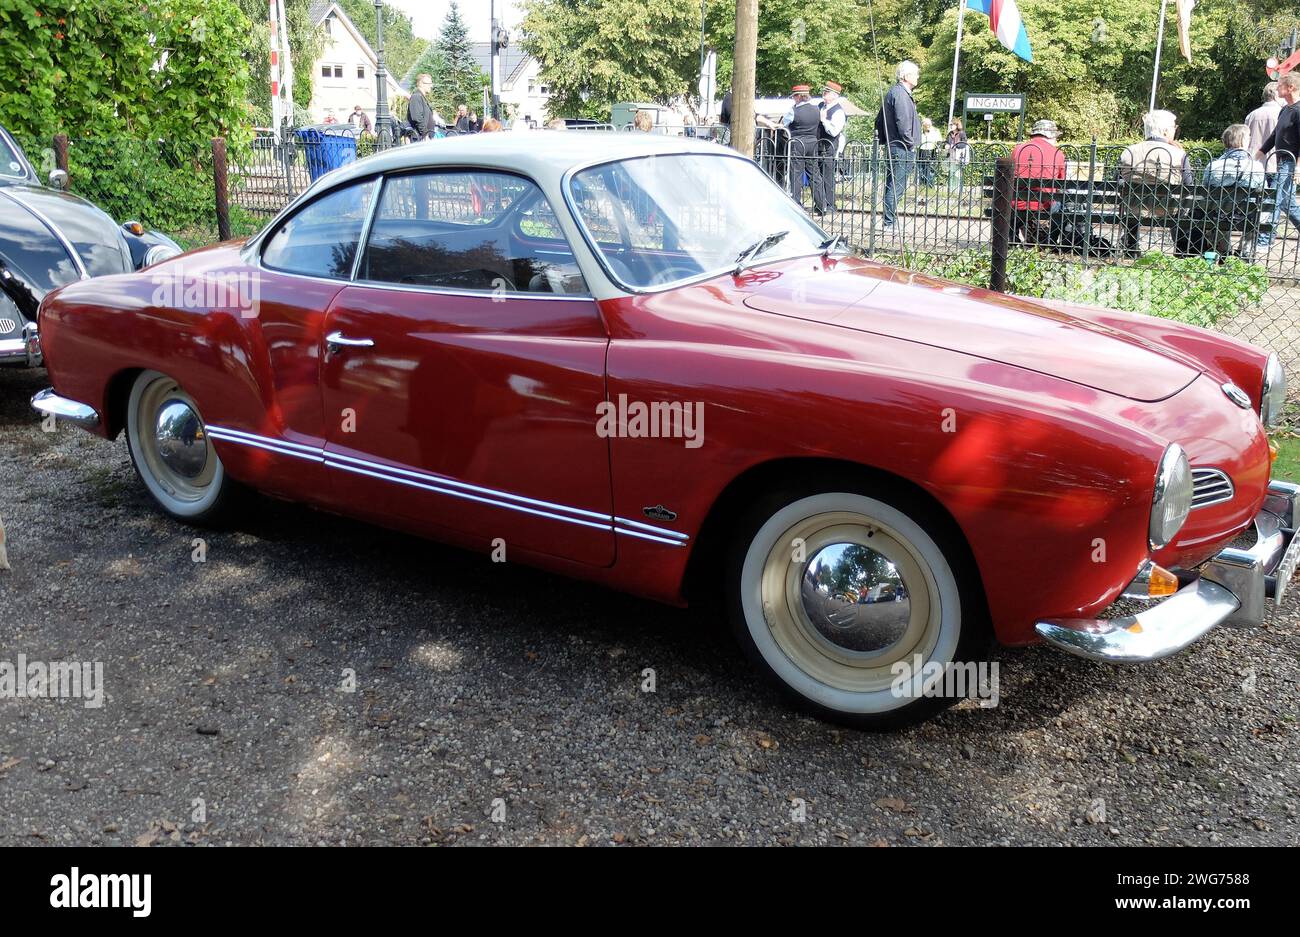 Loenen, Netherlands Sep 8 2019 - A red Volkswagen Karmann Ghia type 14 with whitewall tires is parked Stock Photo